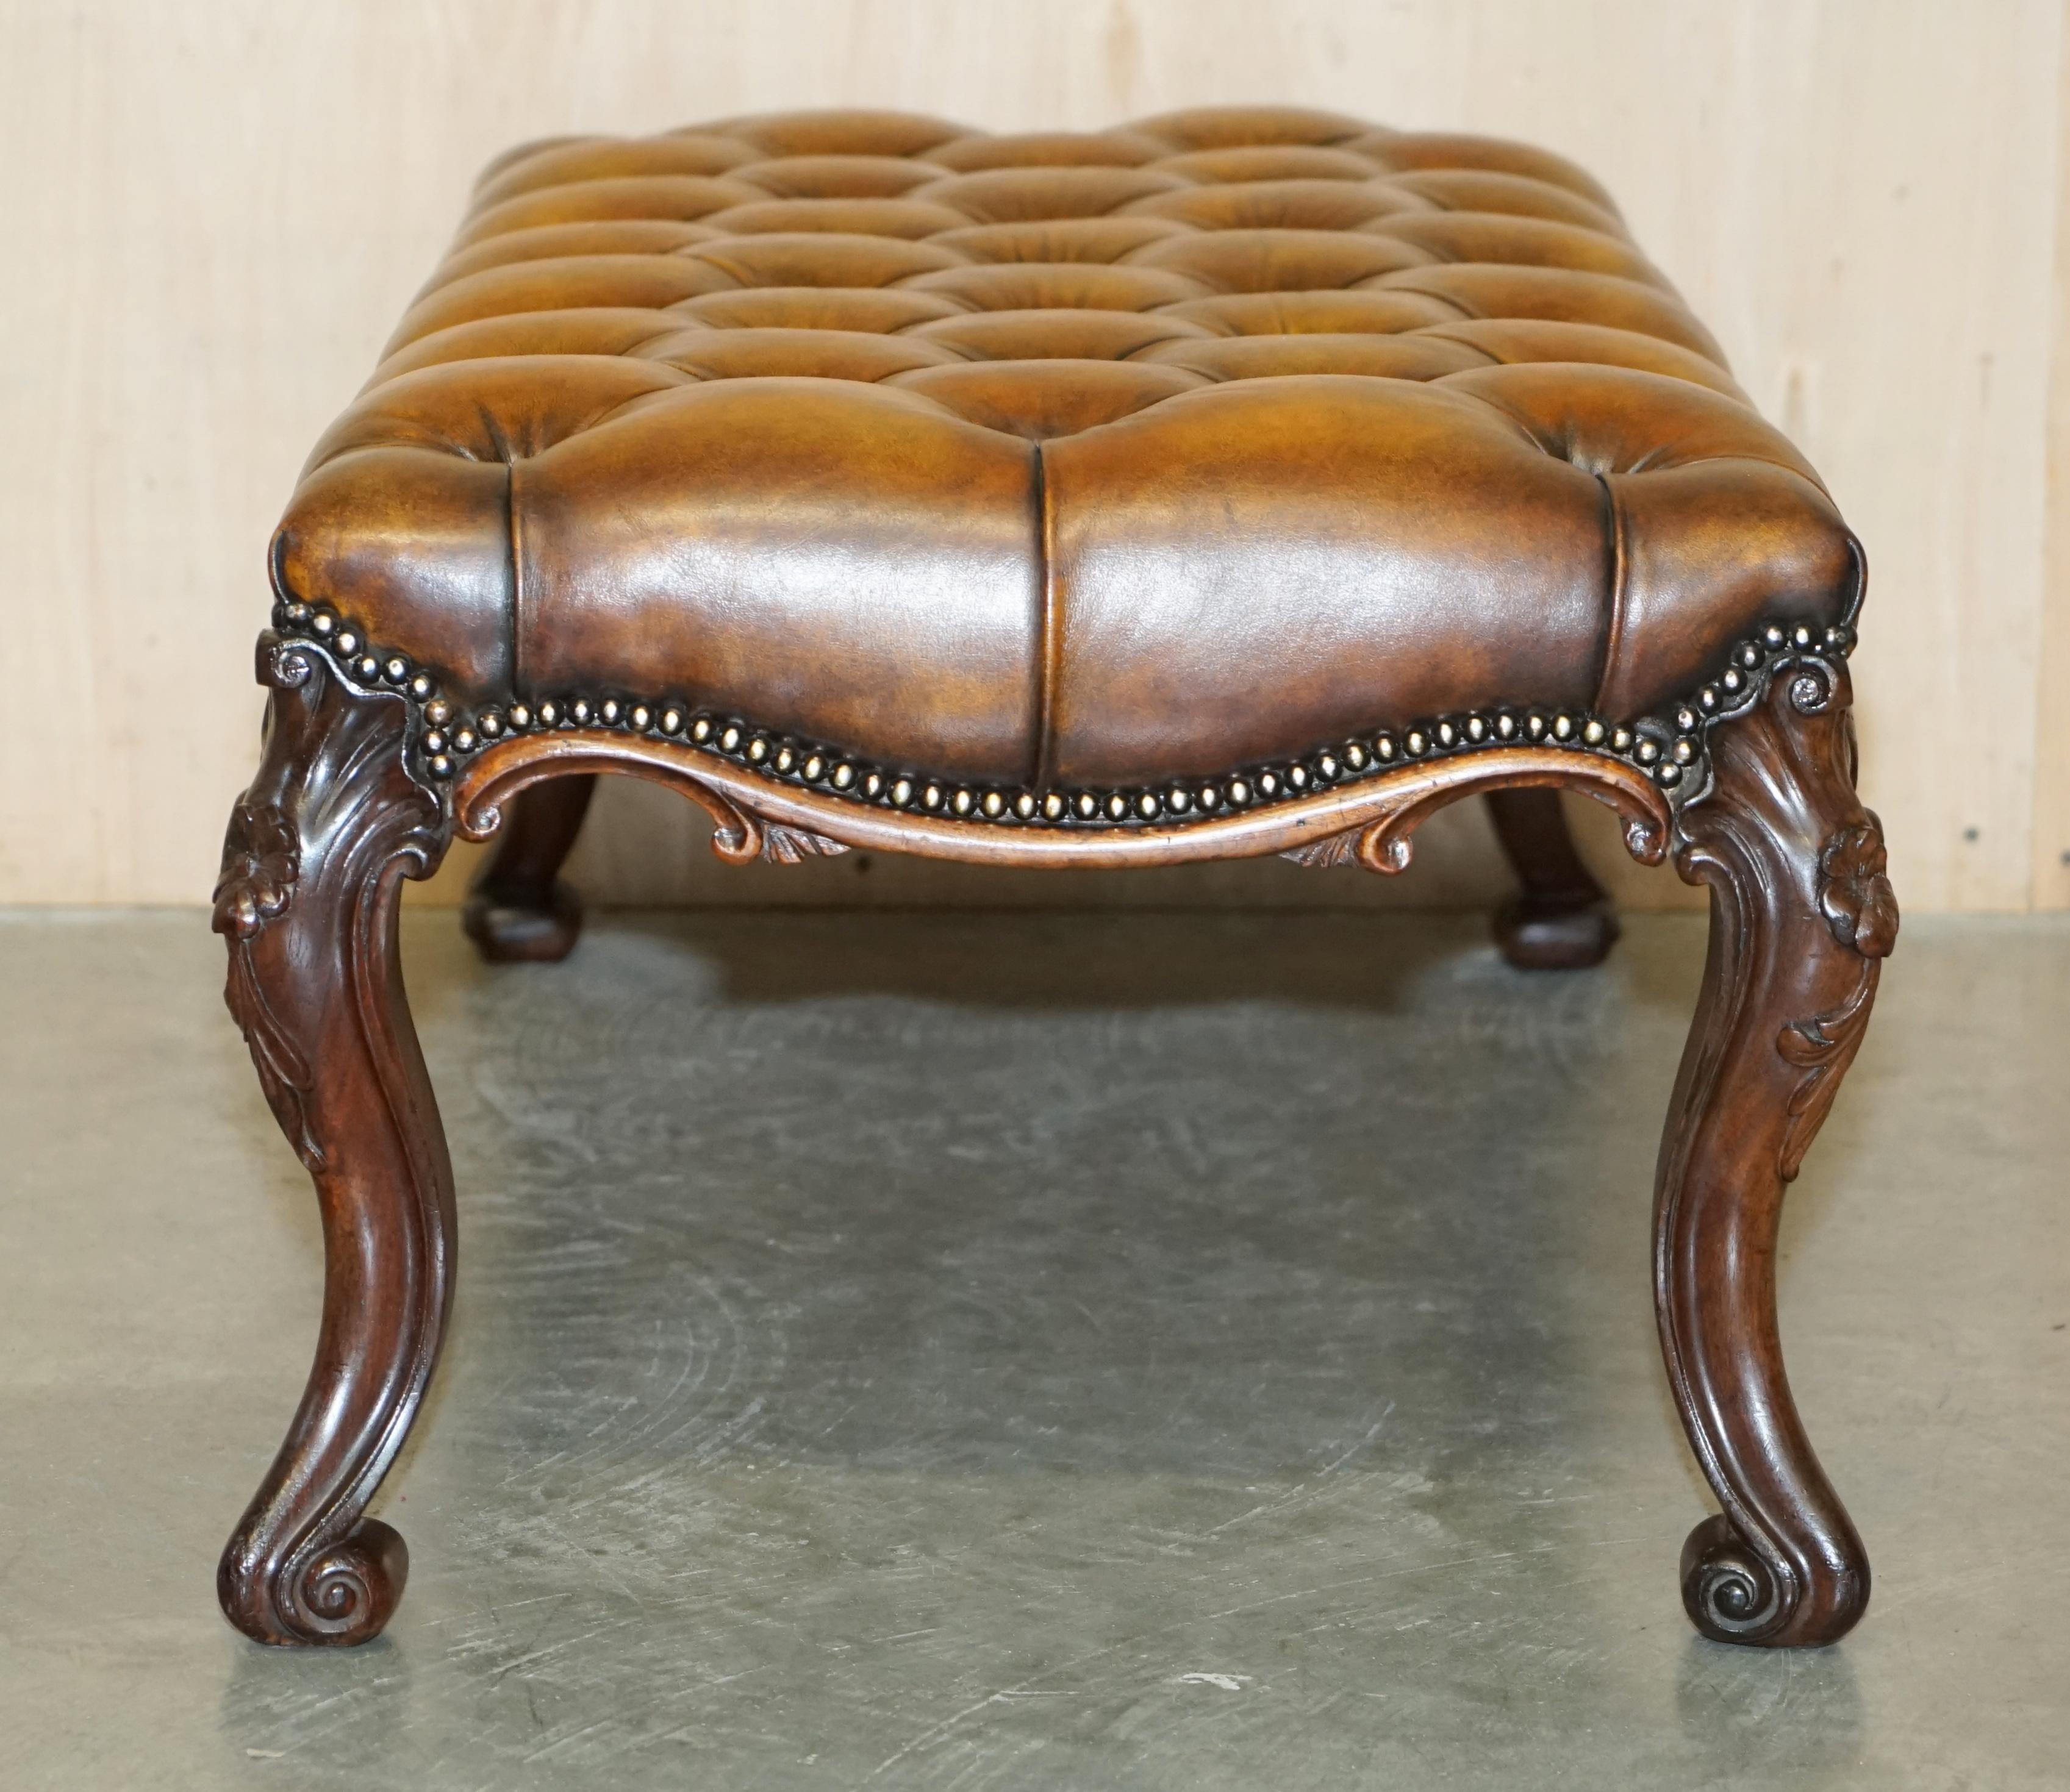 FINE ANTIQUE ViCTORIAN HARDWOOD SHOW FRAME CHESTERFIELD BROWN LEATHER FOOTSTOOL 10